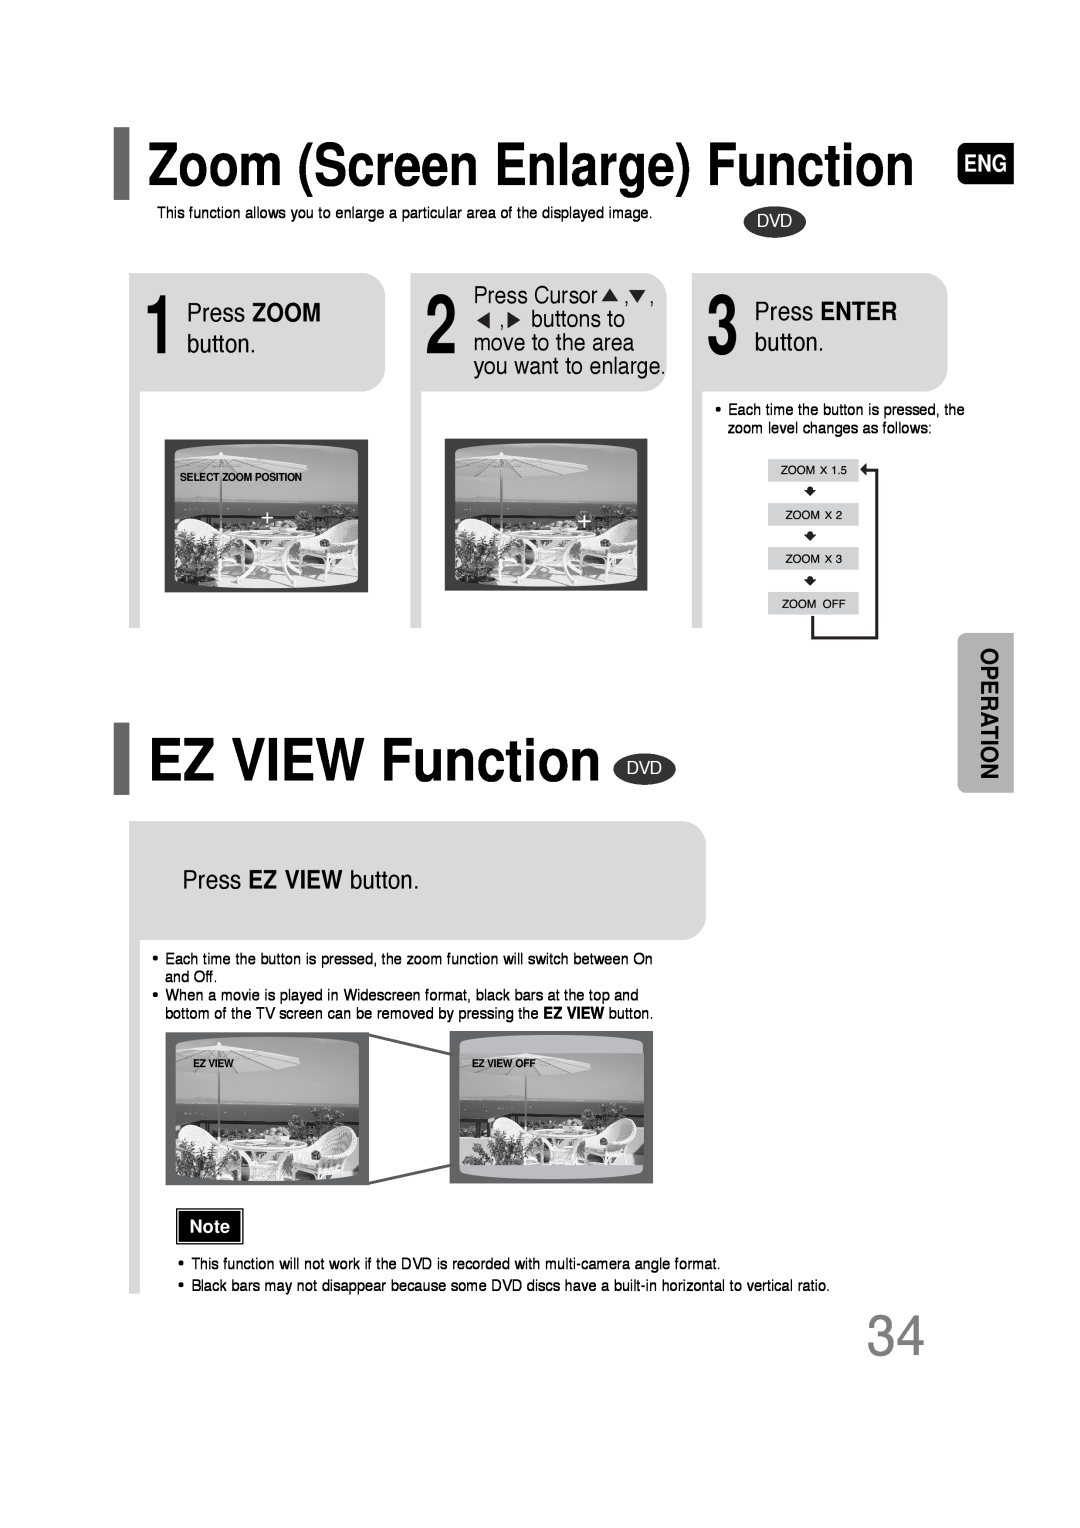 Samsung AH68-01701V manual EZ VIEW Function DVD, Zoom Screen Enlarge Function ENG, Press EZ VIEW button, Press ZOOM button 